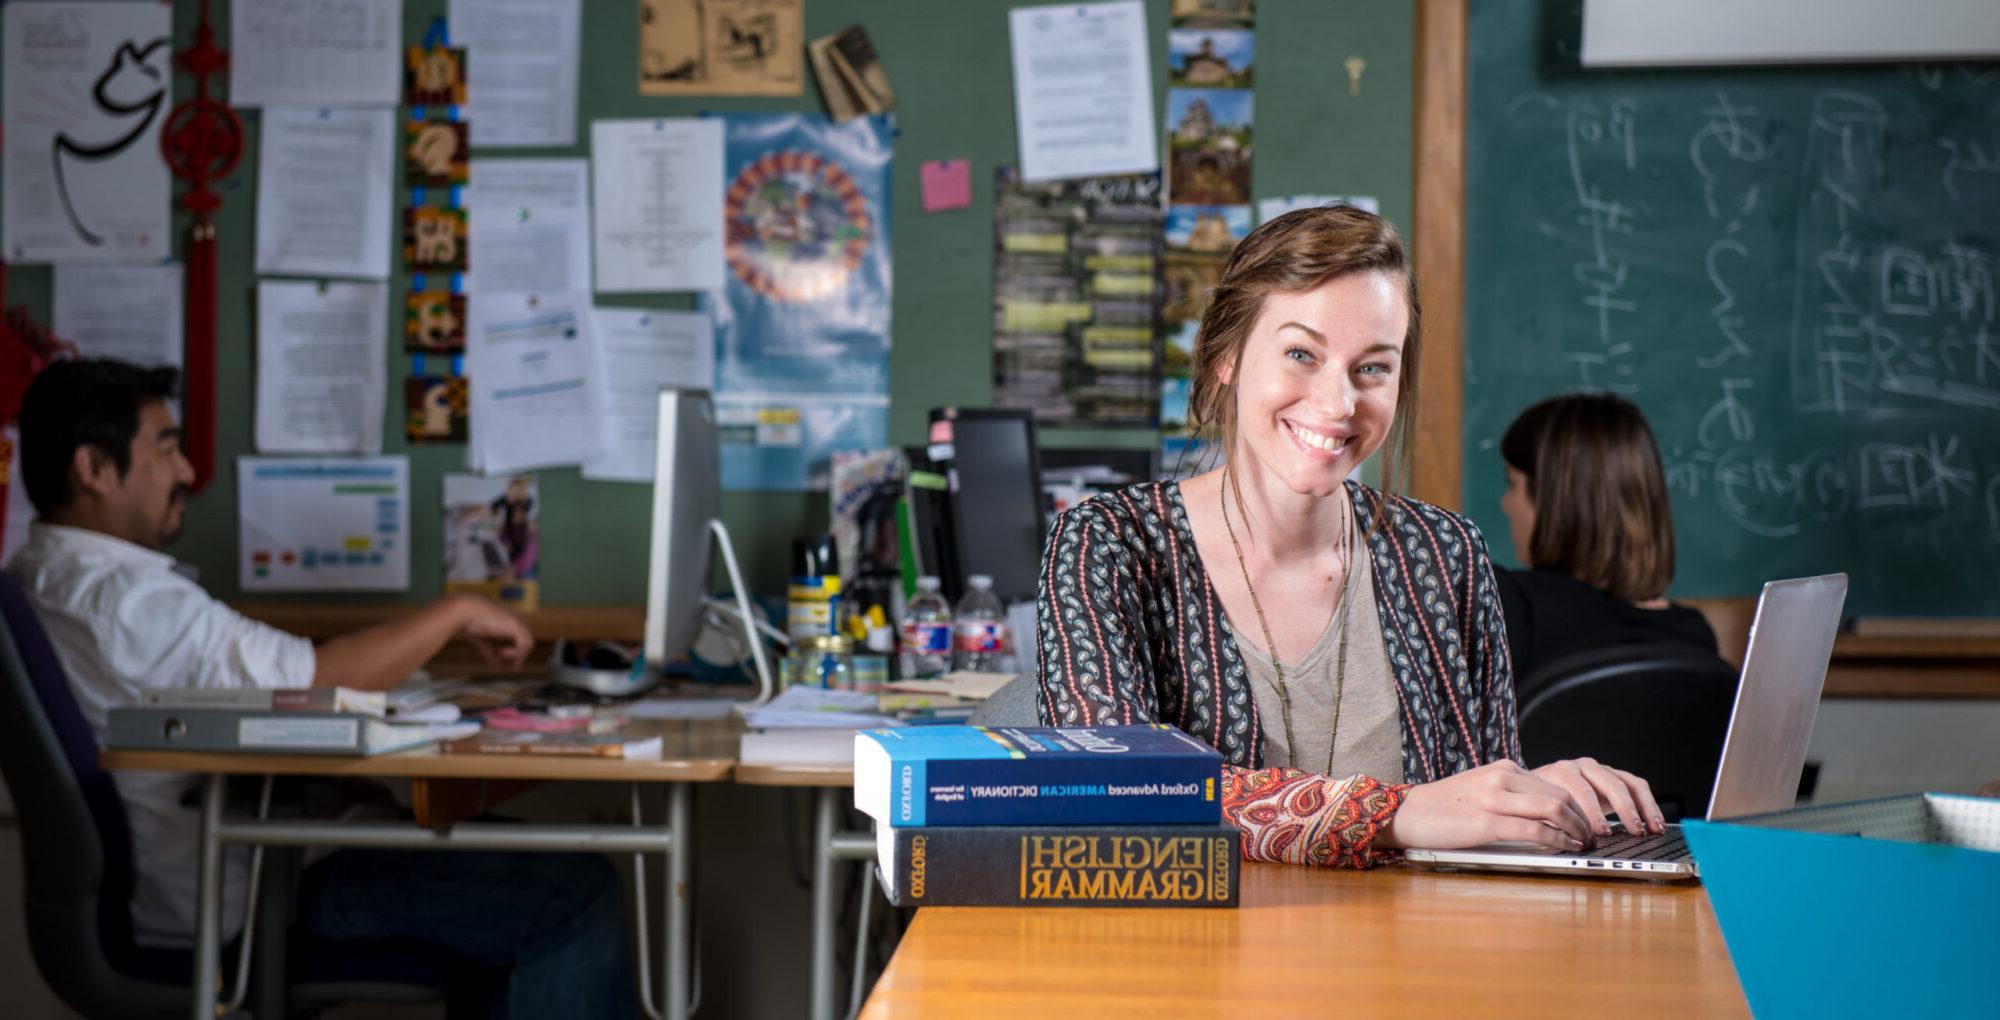 Young woman smiling at desk with laptop and English grammar books.